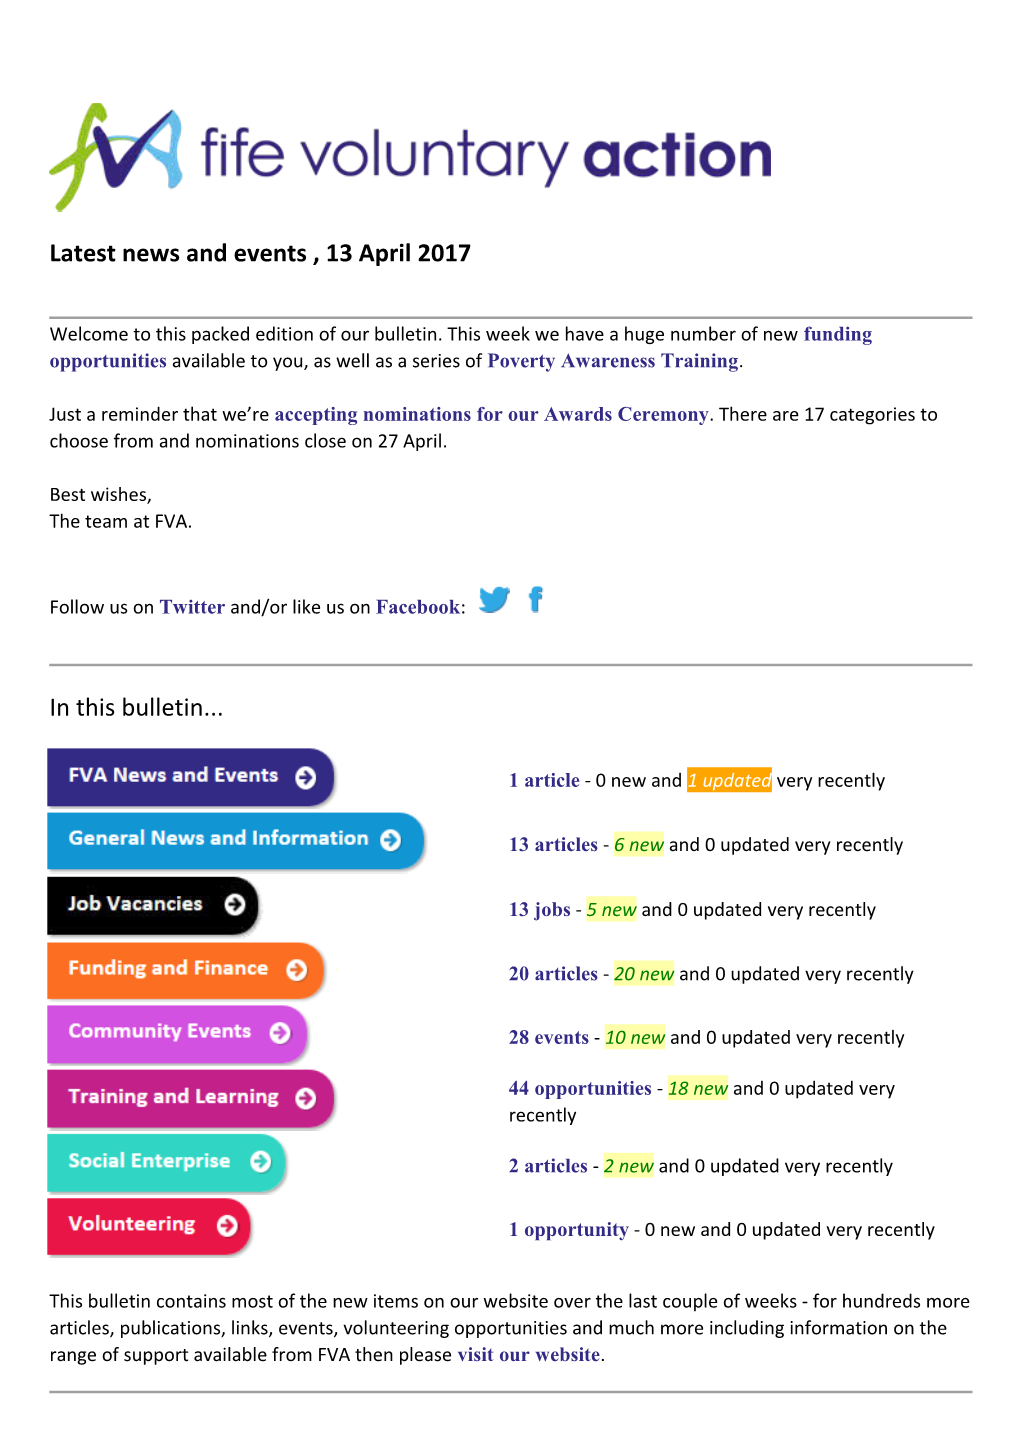 Latest News and Events , 13 April 2017